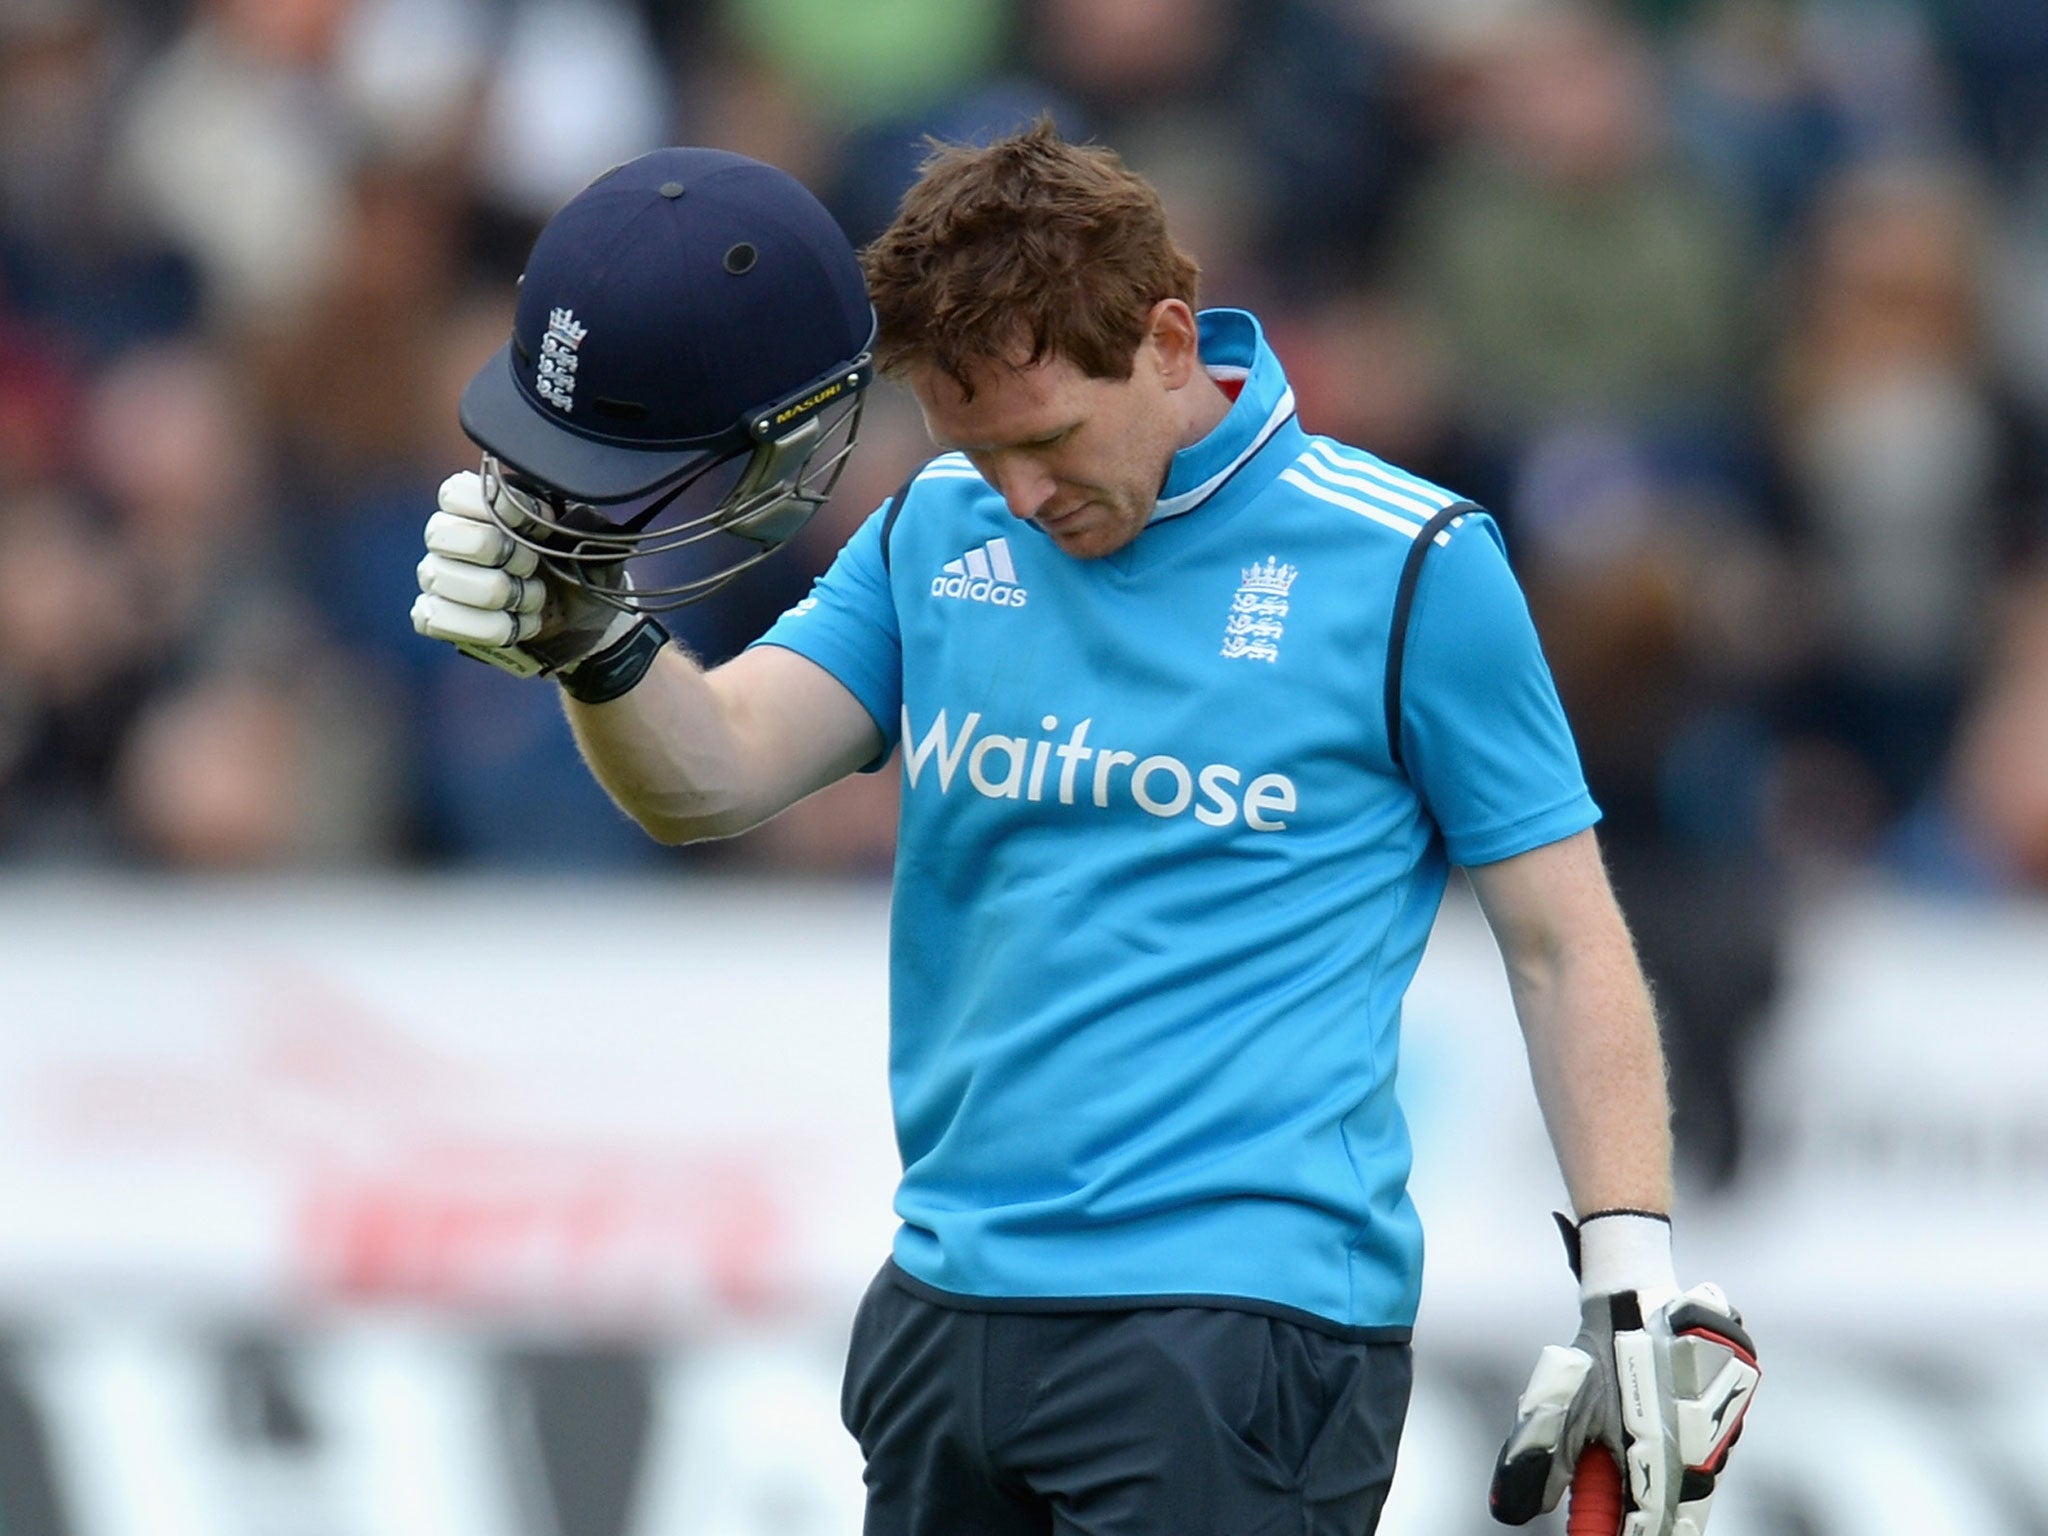 Eoin Morgan top-scored for England with 40 runs in the defeat